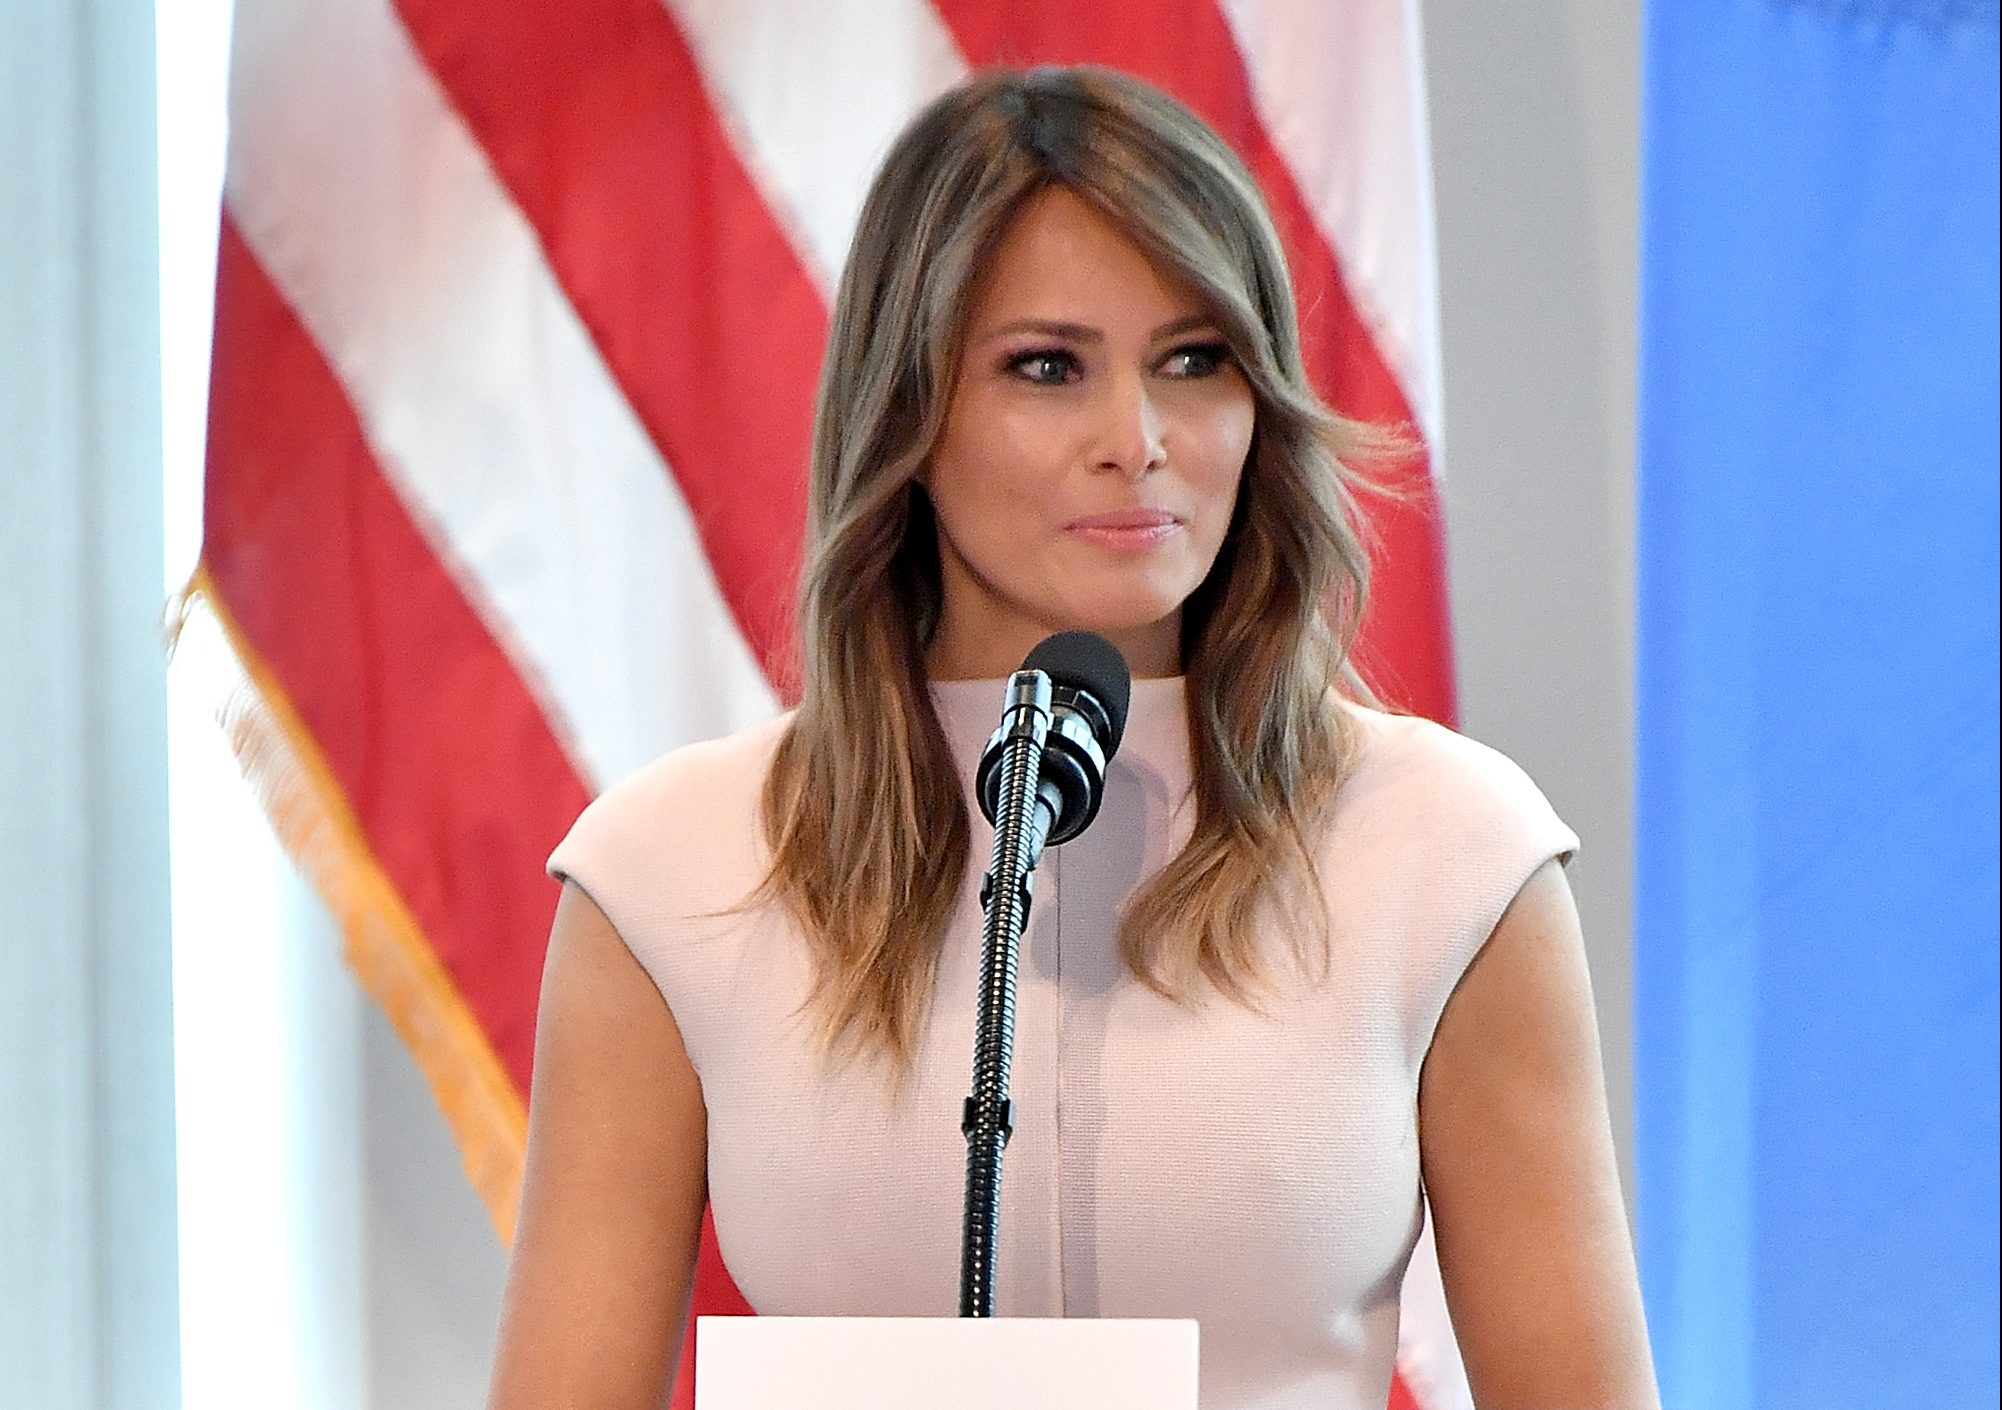 Melania Trump Reckons She Is “The Most Bullied Person In The World”